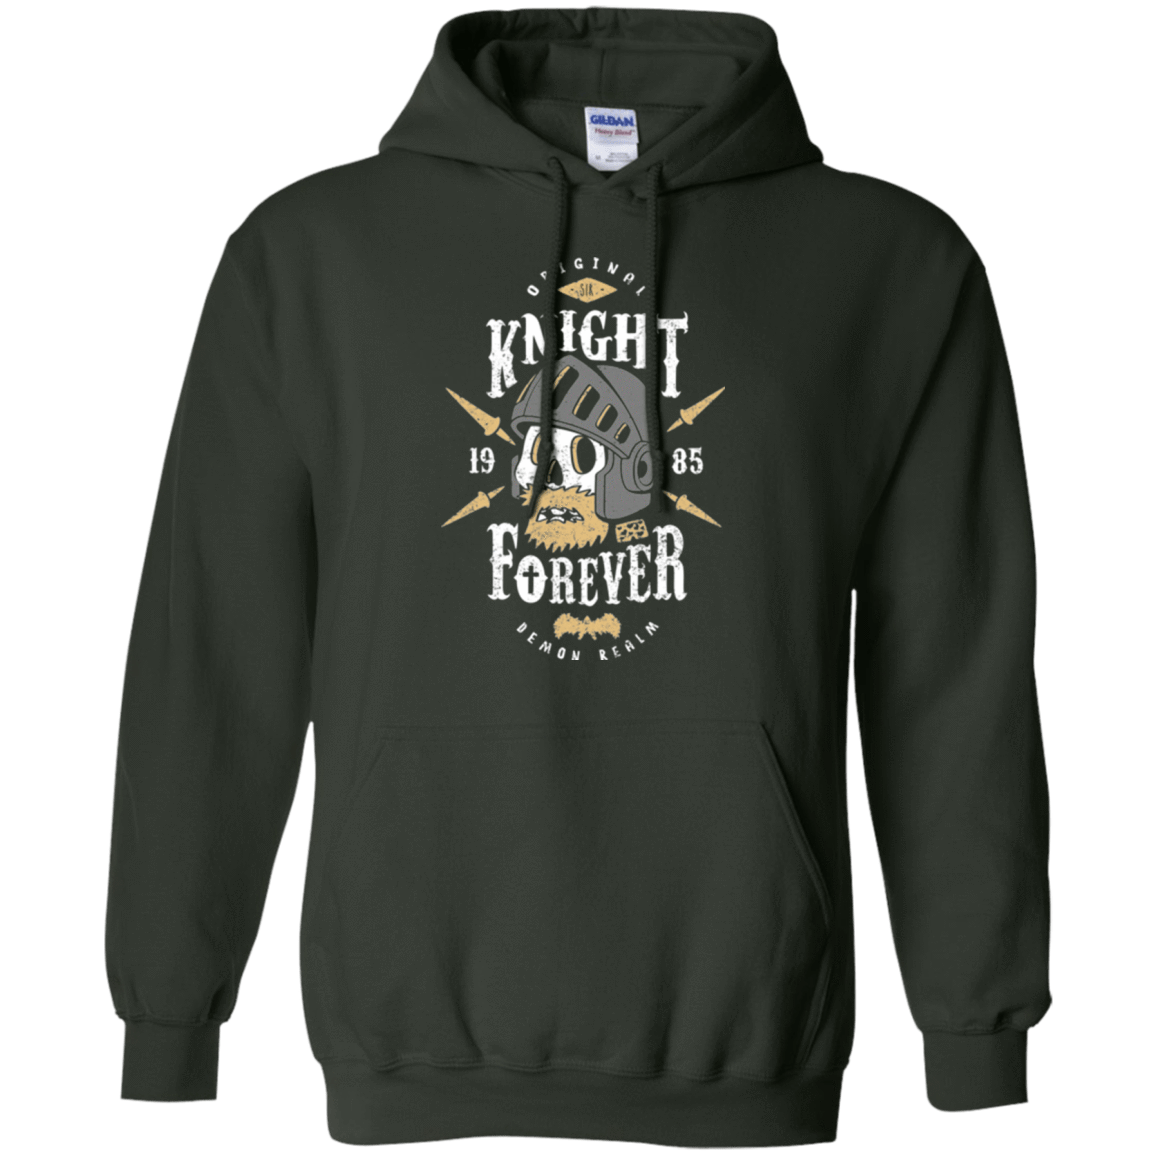 Sweatshirts Forest Green / Small Knight Forever Pullover Hoodie